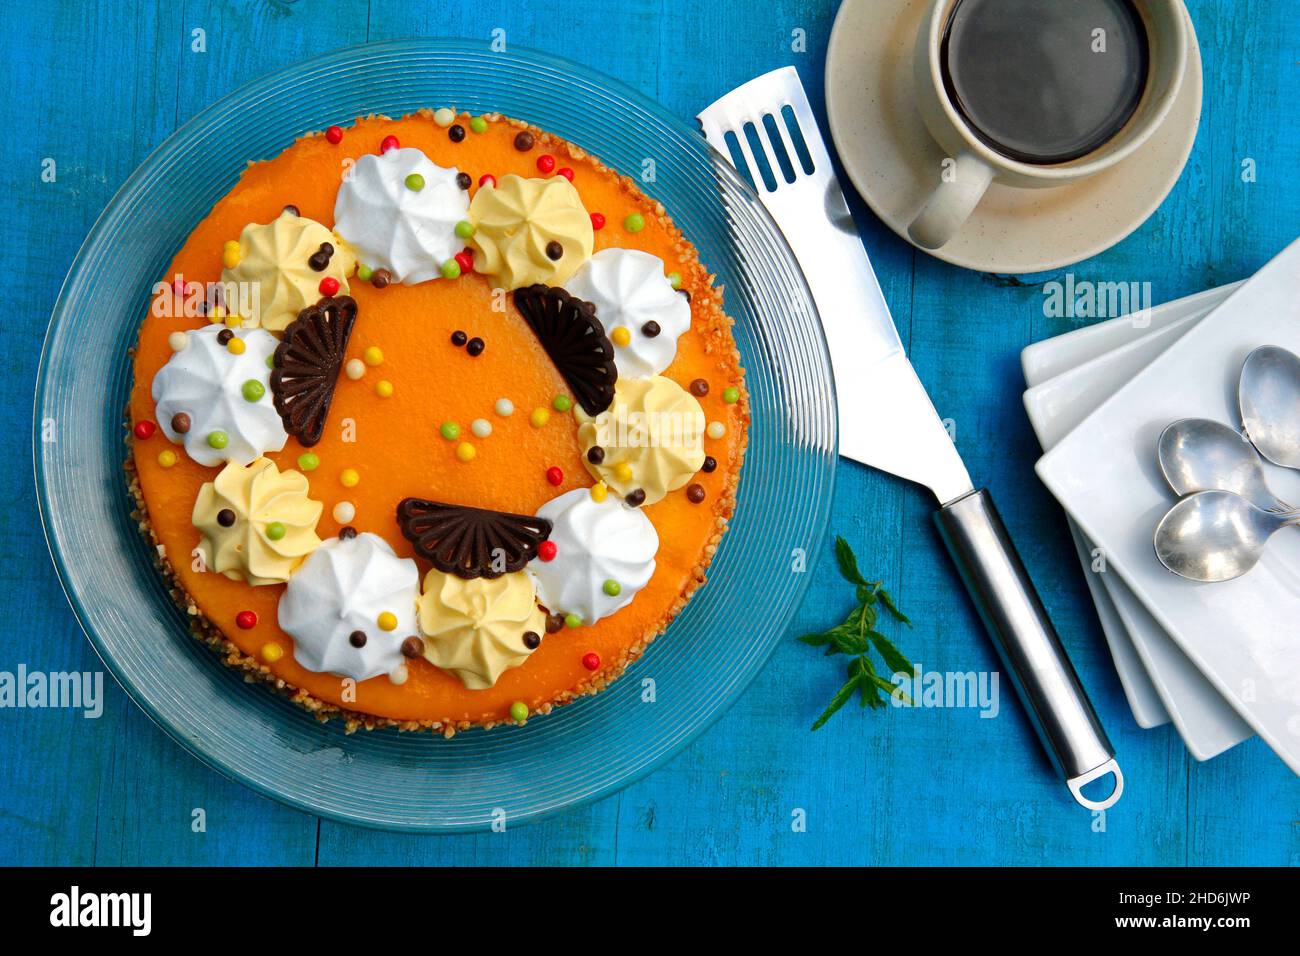 Tart with varied utensils to serve and eat. Stock Photo